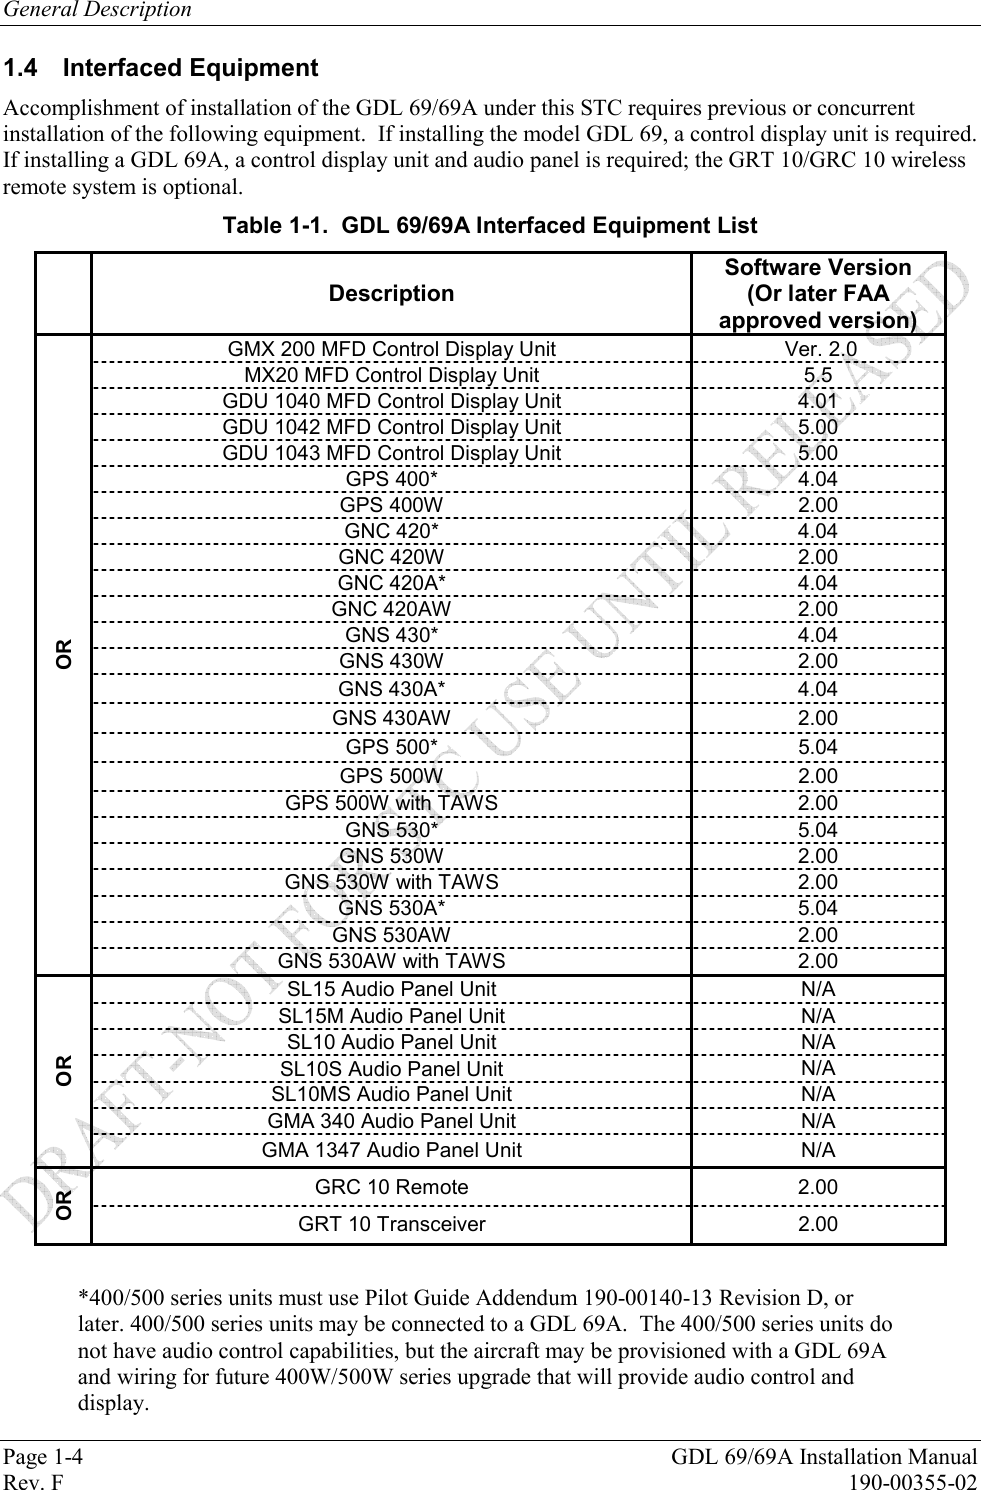 General Description Page 1-4  GDL 69/69A Installation Manual Rev. F  190-00355-02 1.4 Interfaced Equipment Accomplishment of installation of the GDL 69/69A under this STC requires previous or concurrent installation of the following equipment.  If installing the model GDL 69, a control display unit is required. If installing a GDL 69A, a control display unit and audio panel is required; the GRT 10/GRC 10 wireless remote system is optional.  Table 1-1.  GDL 69/69A Interfaced Equipment List  Description Software Version (Or later FAA approved version) GMX 200 MFD Control Display Unit   Ver. 2.0 MX20 MFD Control Display Unit  5.5 GDU 1040 MFD Control Display Unit  4.01 GDU 1042 MFD Control Display Unit  5.00 GDU 1043 MFD Control Display Unit  5.00 GPS 400*  4.04 GPS 400W  2.00 GNC 420*  4.04 GNC 420W  2.00 GNC 420A*  4.04 GNC 420AW  2.00 GNS 430*  4.04 GNS 430W  2.00 GNS 430A*  4.04 GNS 430AW  2.00 GPS 500*  5.04 GPS 500W  2.00 GPS 500W with TAWS  2.00 GNS 530*  5.04 GNS 530W  2.00 GNS 530W with TAWS  2.00 GNS 530A*  5.04 GNS 530AW  2.00 OR GNS 530AW with TAWS  2.00 SL15 Audio Panel Unit  N/A SL15M Audio Panel Unit  N/A SL10 Audio Panel Unit  N/A SL10S Audio Panel Unit  N/A SL10MS Audio Panel Unit  N/A GMA 340 Audio Panel Unit  N/A OR GMA 1347 Audio Panel Unit  N/A GRC 10 Remote  2.00 OR GRT 10 Transceiver  2.00  *400/500 series units must use Pilot Guide Addendum 190-00140-13 Revision D, or later. 400/500 series units may be connected to a GDL 69A.  The 400/500 series units do not have audio control capabilities, but the aircraft may be provisioned with a GDL 69A and wiring for future 400W/500W series upgrade that will provide audio control and display. 